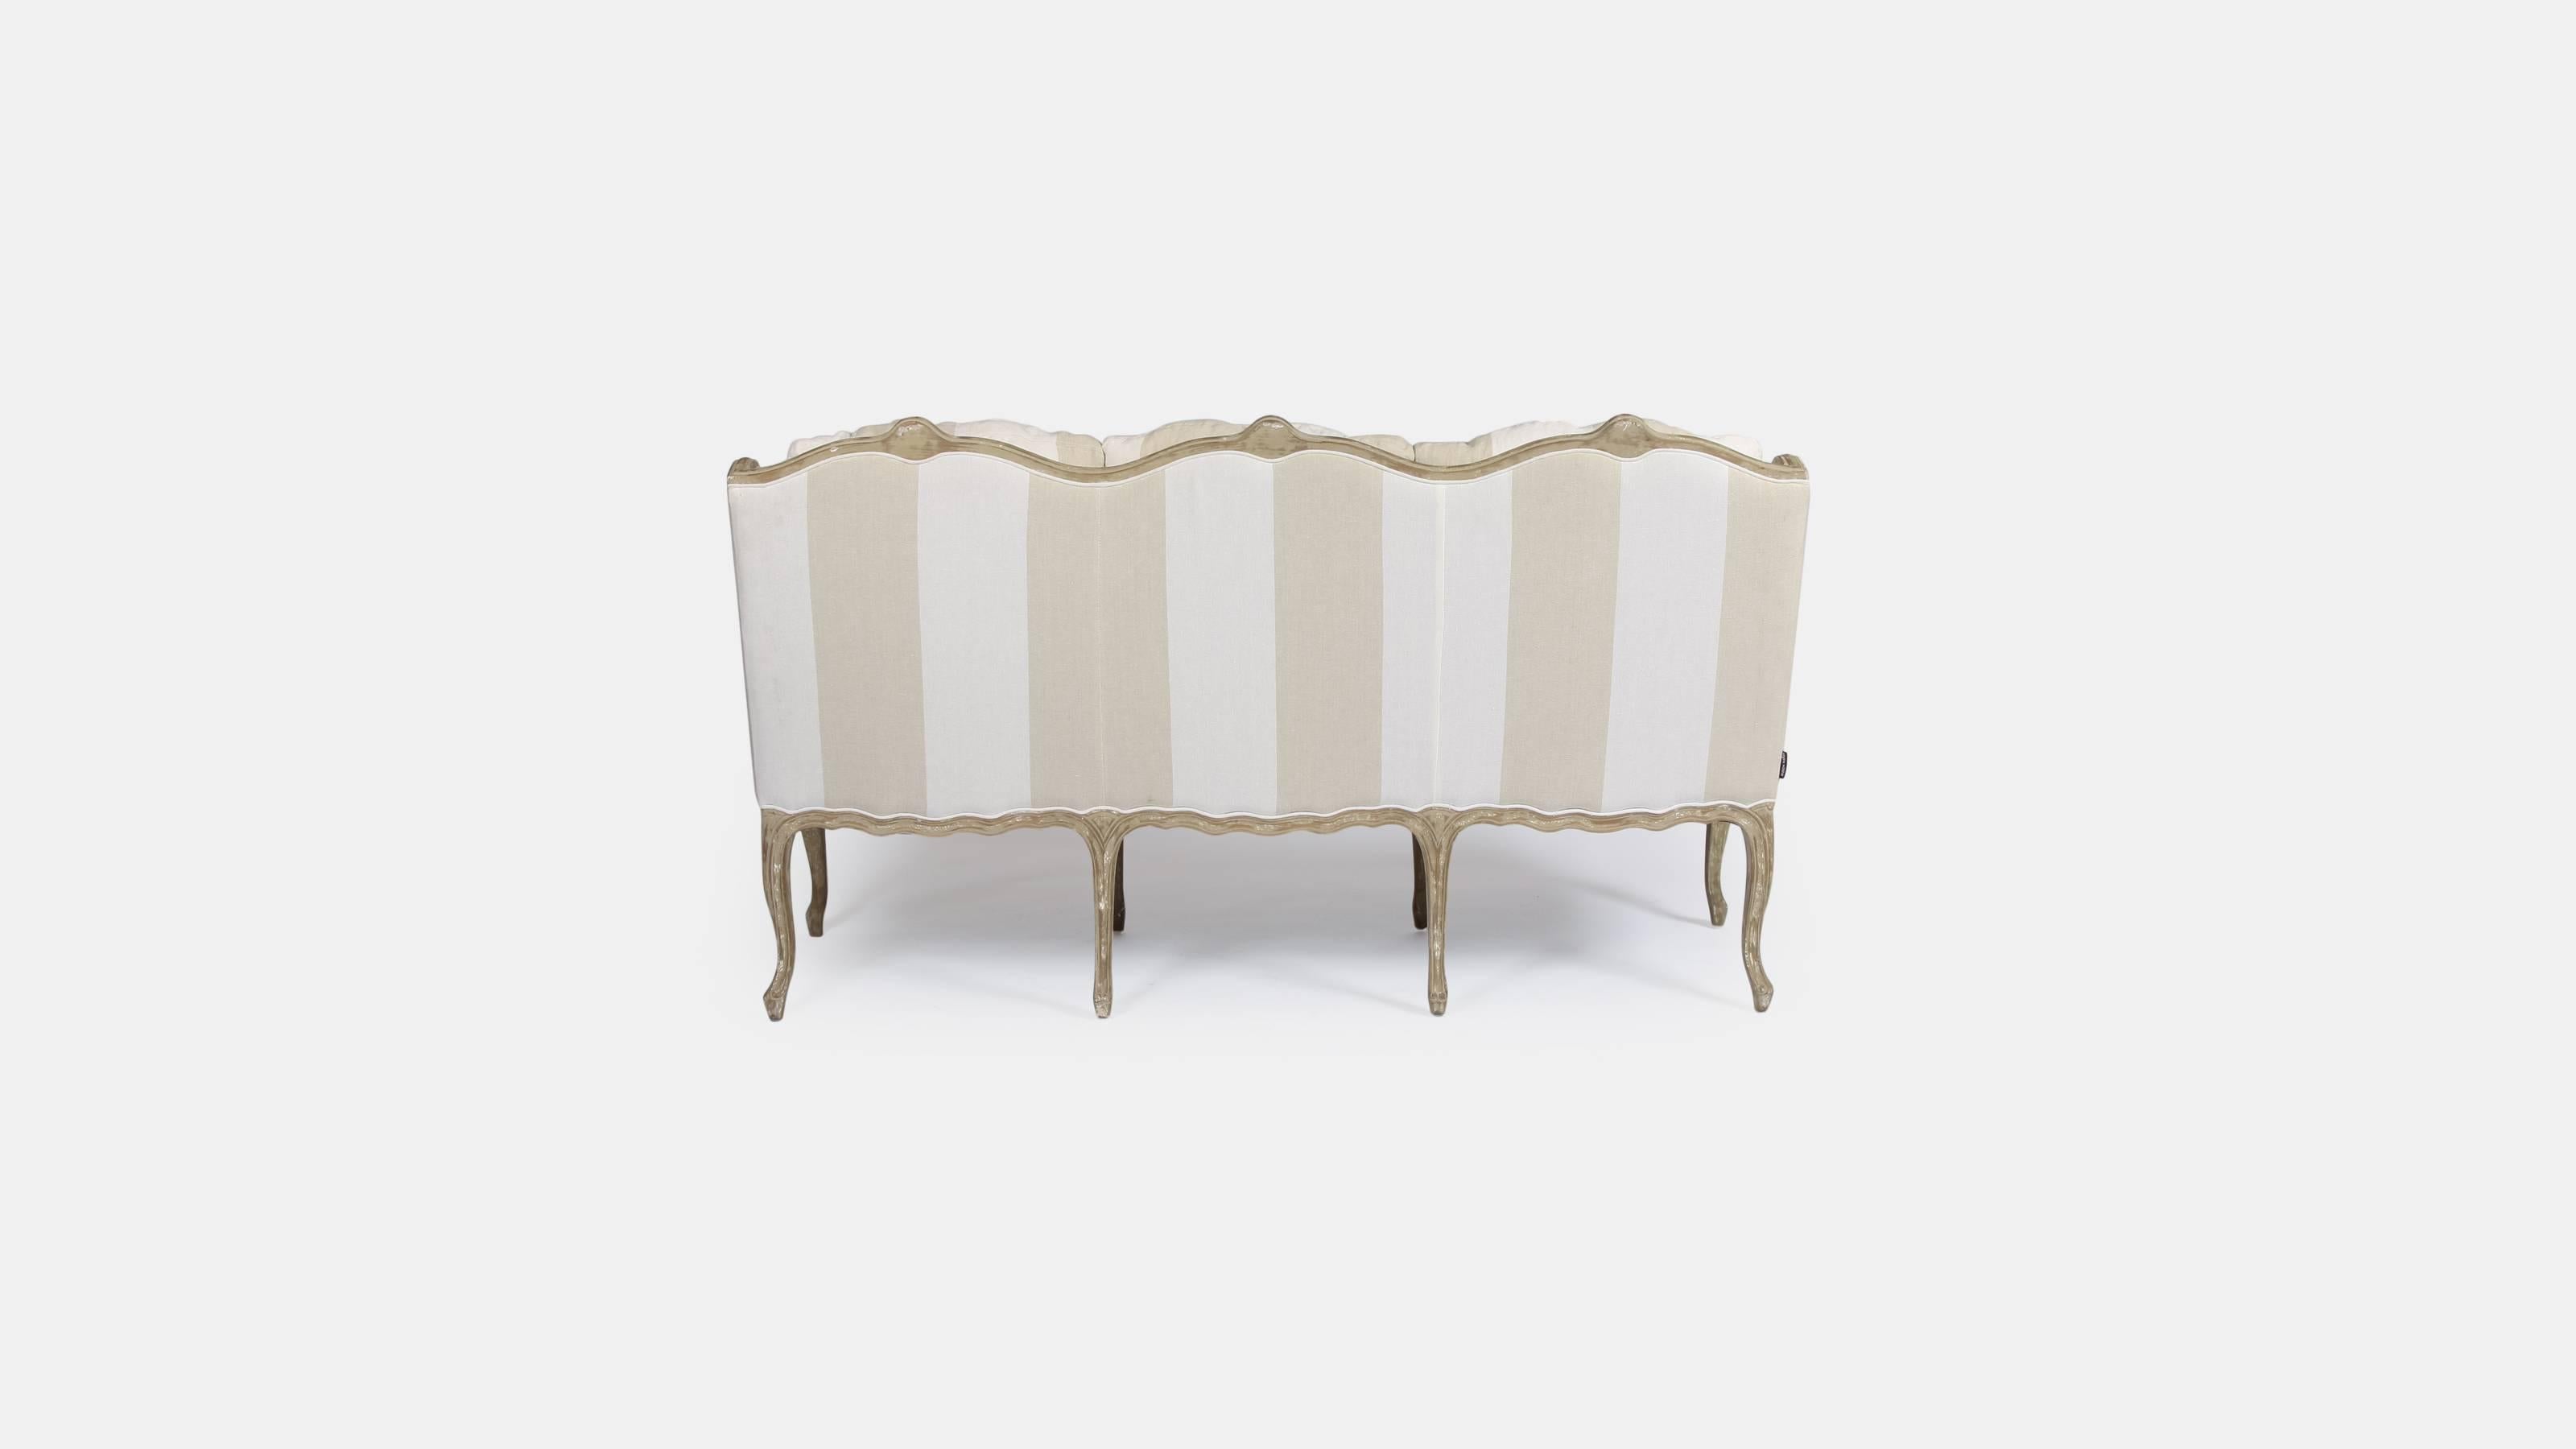 A beautiful stripe linen upholstered three-seat settee by Andrew Martin.

This settee would be a great addition to any hallway, bedroom or drawing room.